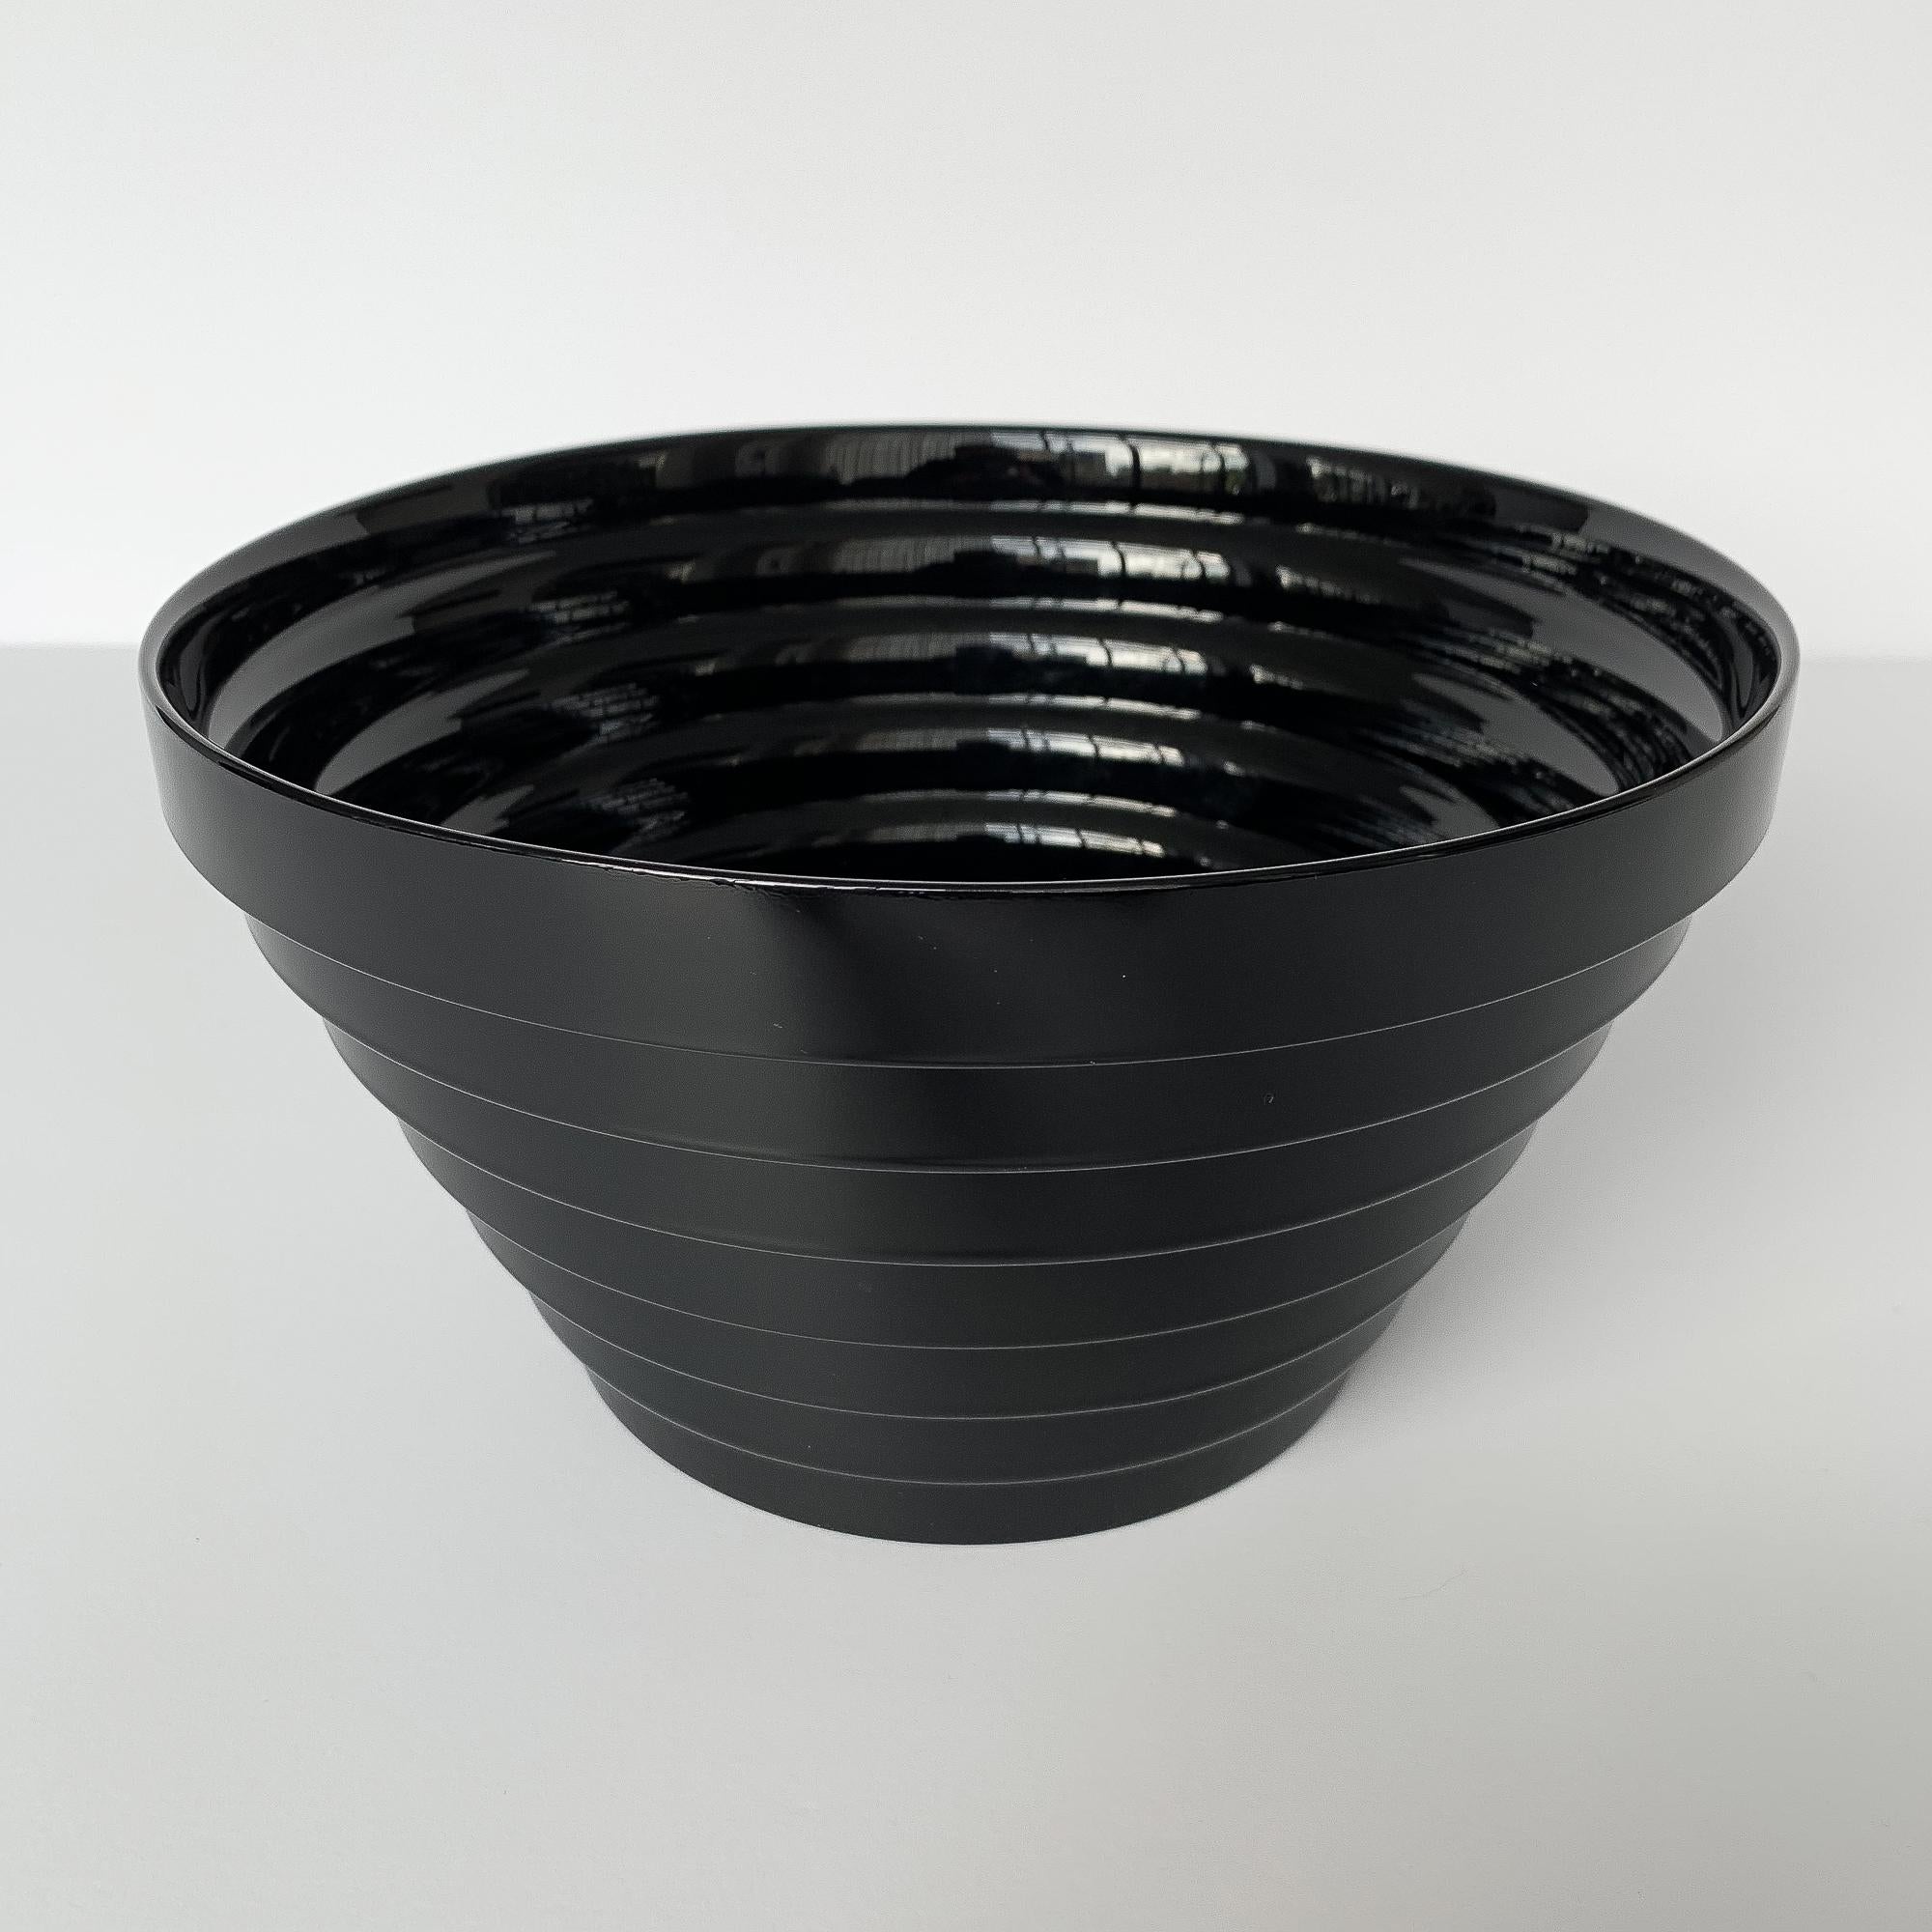 Modernist Italian black glass bowl with unique stepped design on the interior and exterior. Reminiscent of designs by Sottsass and Sergio Asti. Original 